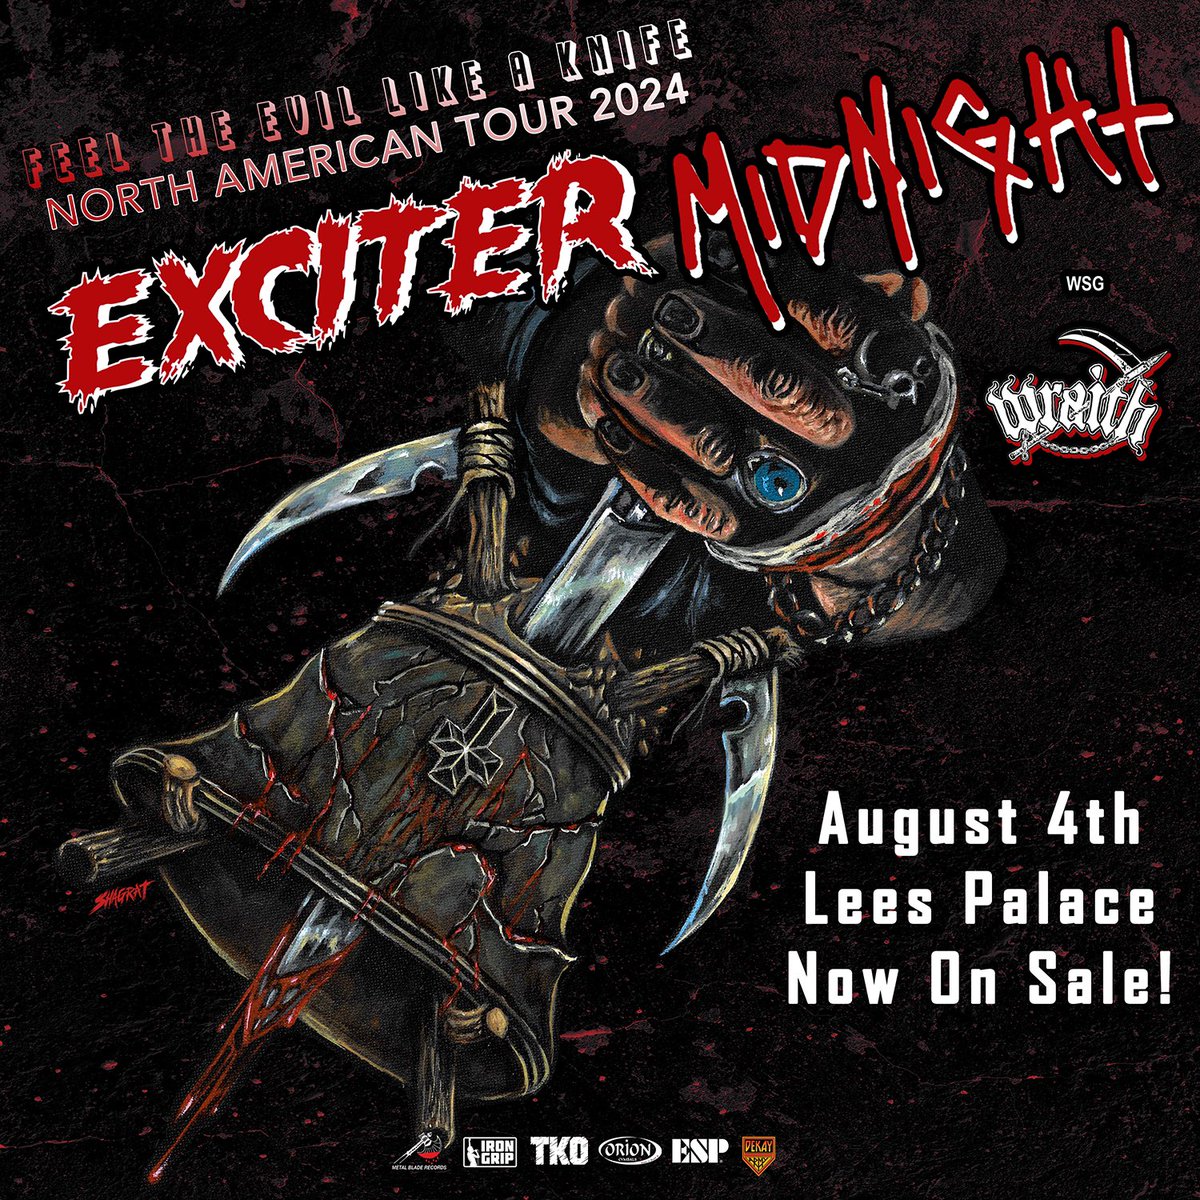 Now on sale! @ExciterBand #midnight @wraiththrash live at @LeesPalaceTO August 4th Tickets/info here: inertia-entertainment.com/events/exciter… #torontoconcerts #livemusicintoronto #inertialive #inertiaentertainment